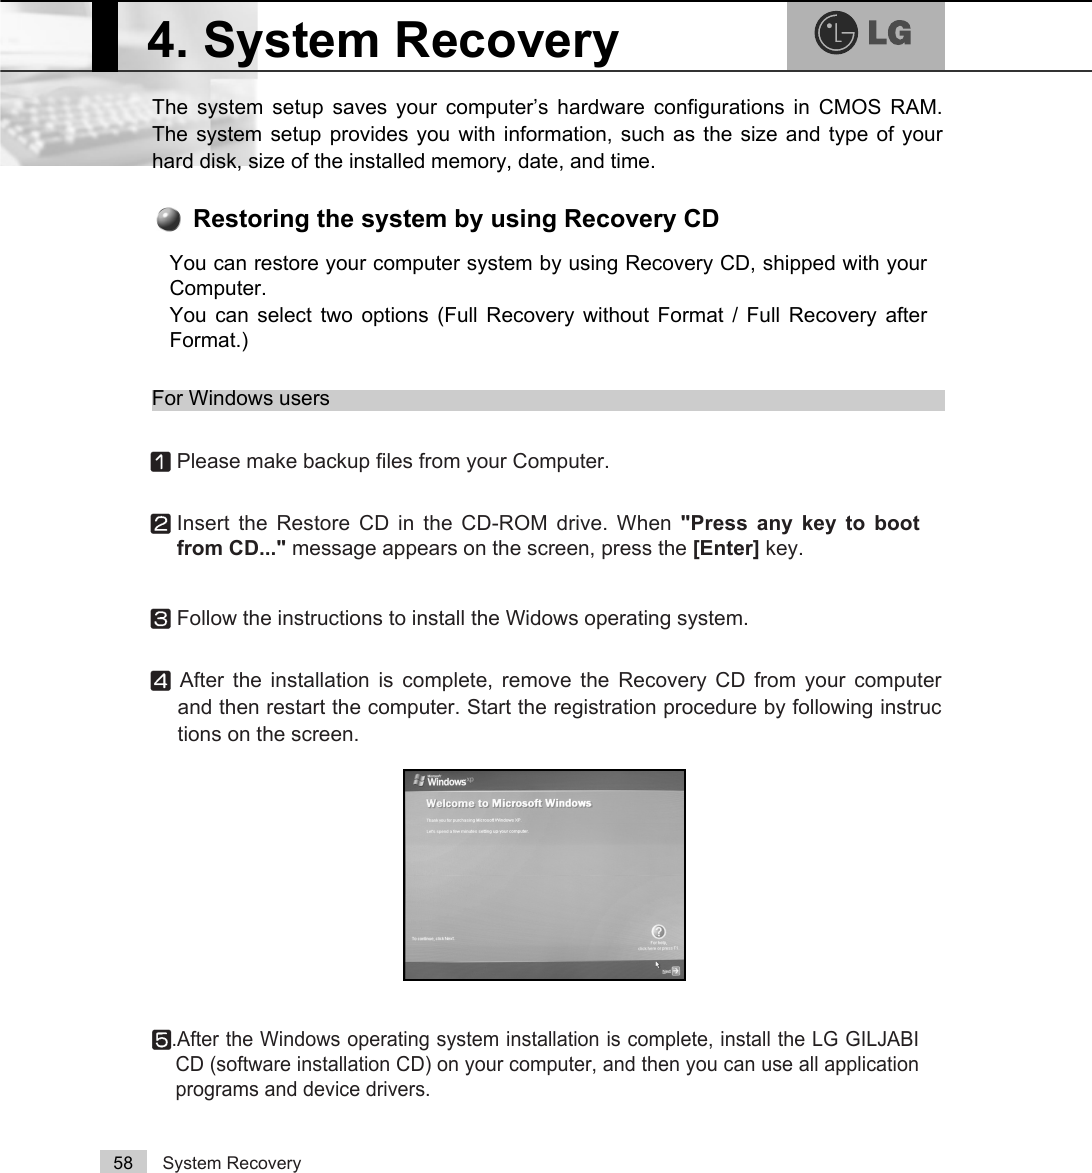 System Recovery58The system setup saves your computer’s hardware configurations in CMOS RAM.The system setup provides you with information, such as the size and type of yourhard disk, size of the installed memory, date, and time.4. System RecoveryⓞPlease make backup files from your Computer.ⓟInsert the Restore CD in the CD-ROM drive. When &quot;Press any key to bootfrom CD...&quot; message appears on the screen, press the [Enter] key. ⓠFollow the instructions to install the Widows operating system.ⓡAfter the installation is complete, remove the Recovery CD from your computerand then restart the computer. Start the registration procedure by following instructions on the screen.ⓢ.After the Windows operating system installation is complete, install the LG GILJABICD (software installation CD) on your computer, and then you can use all applicationprograms and device drivers. You can restore your computer system by using Recovery CD, shipped with yourComputer.You can select two options (Full Recovery without Format / Full Recovery afterFormat.) Restoring the system by using Recovery CDFor Windows users